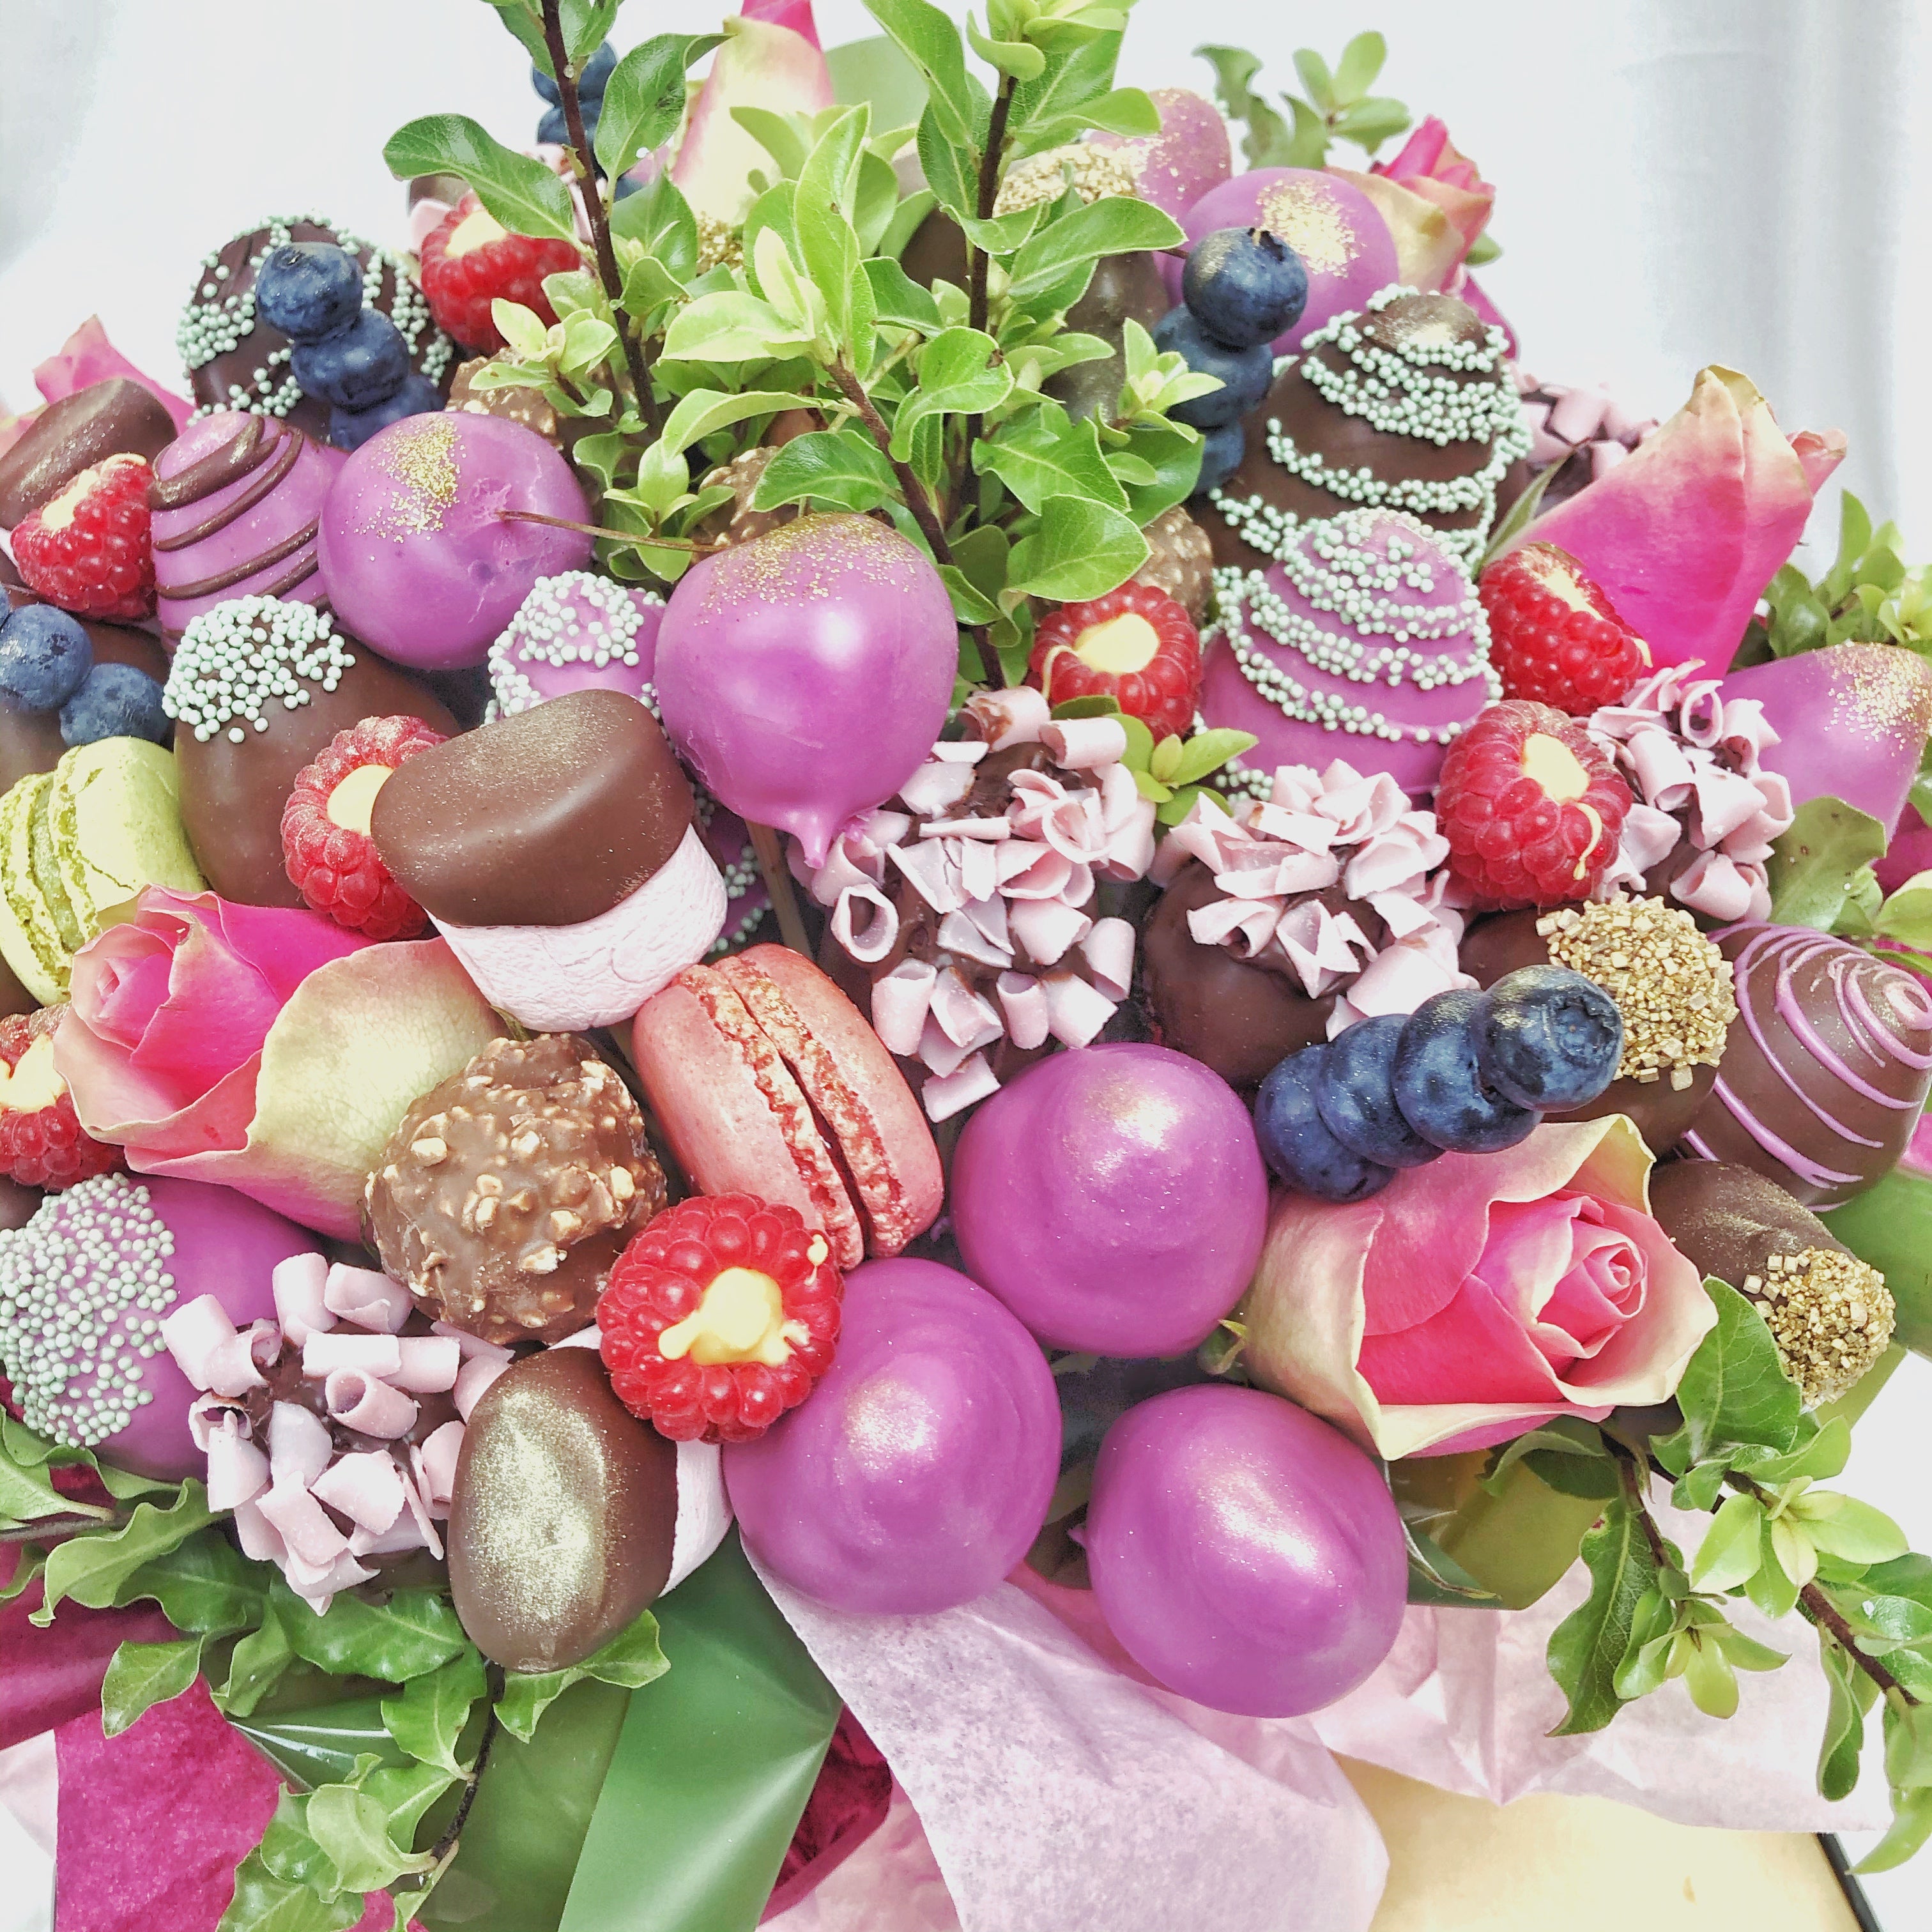 Pink and green chocolate covered strawberries in a luxury Bouquet  delivery next day or same day online order